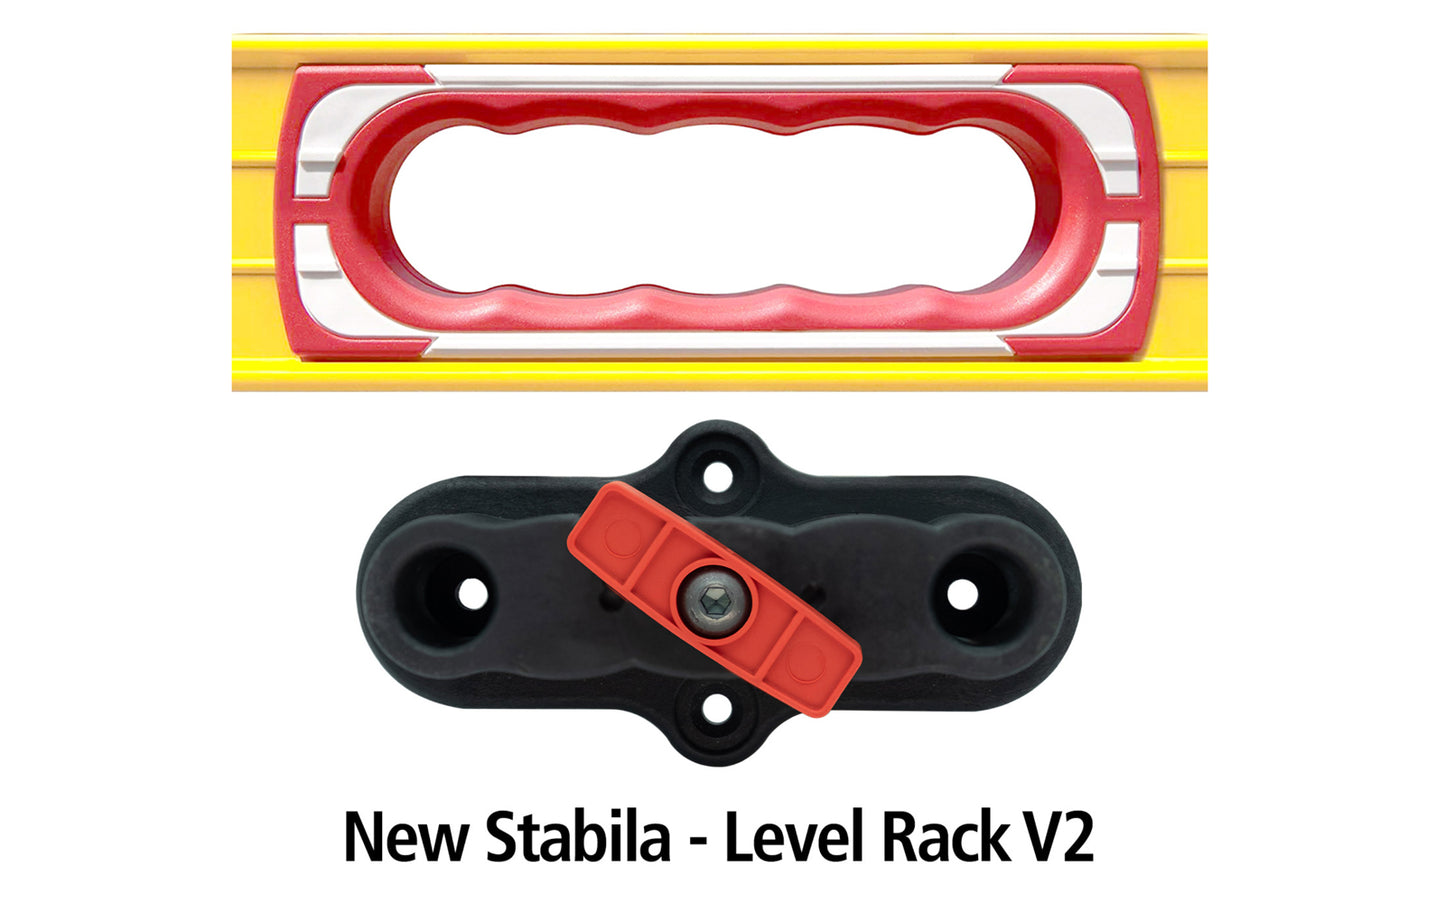 FastCap Level Rack is an innovative solution to securely & safely store your Stabila levels. Mount most Stabila levels vertically or horizontally on drywall, bare studs, garage door panels, trailer walls, or work truck. Cam-lock provides a positive lock that holds your level tight, secure, & rattle-free. New Stabila Style. Level Rack V2